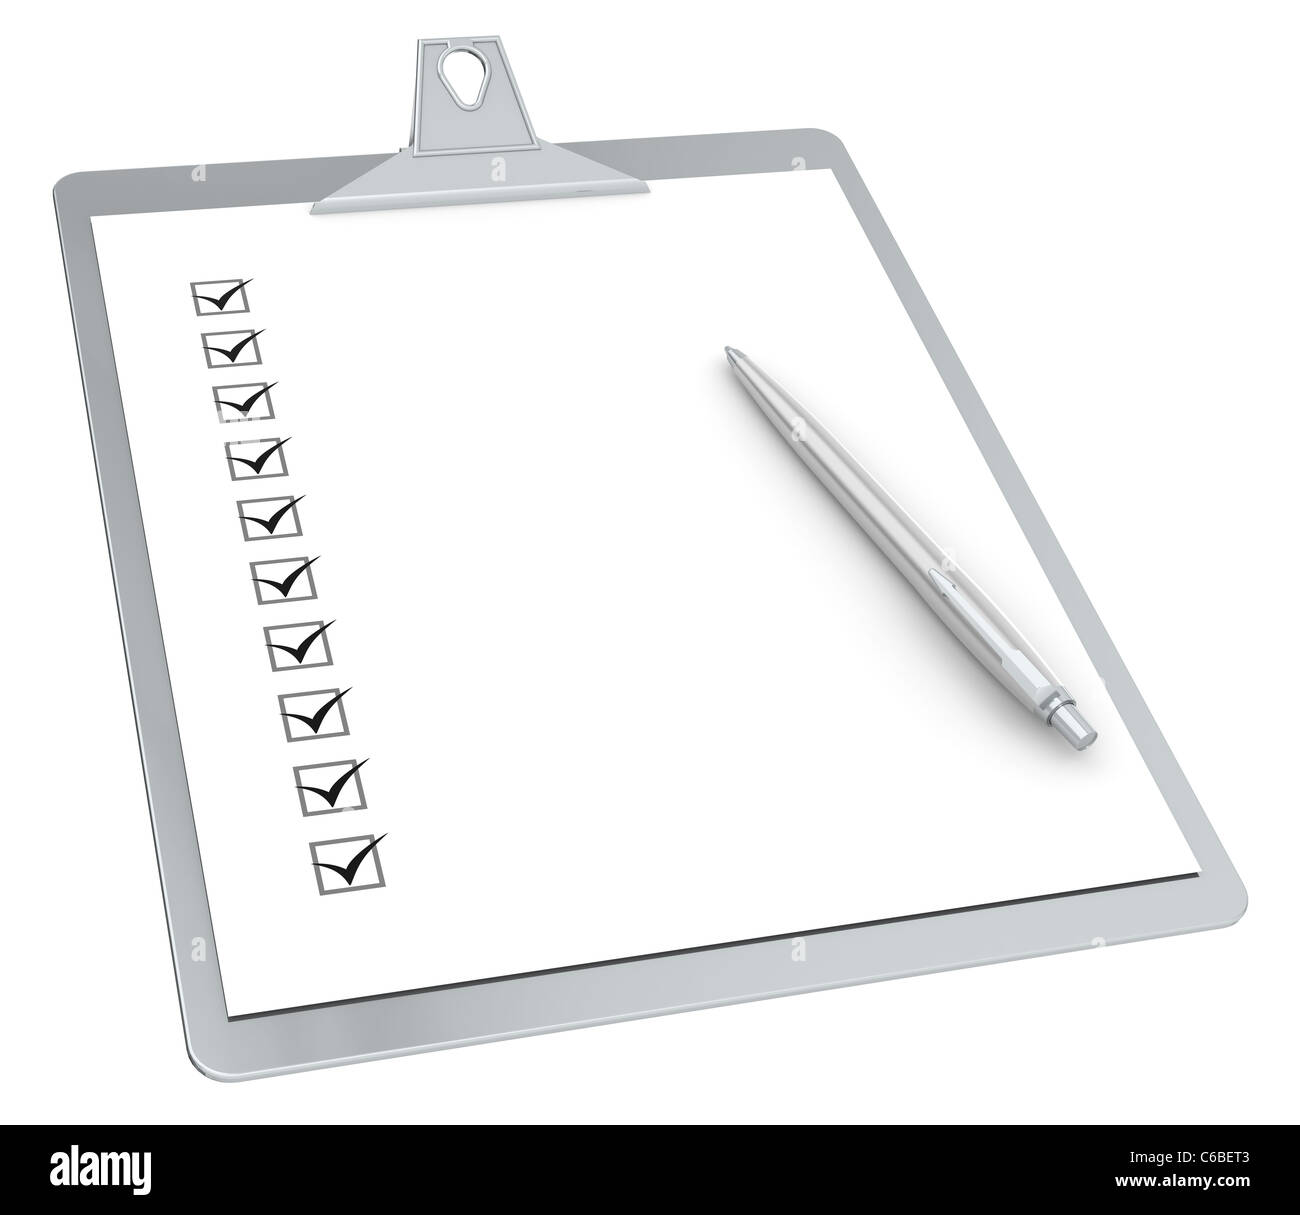 Clipboard with Checklist X 10 and Pen. Steel Edition Stock Photo